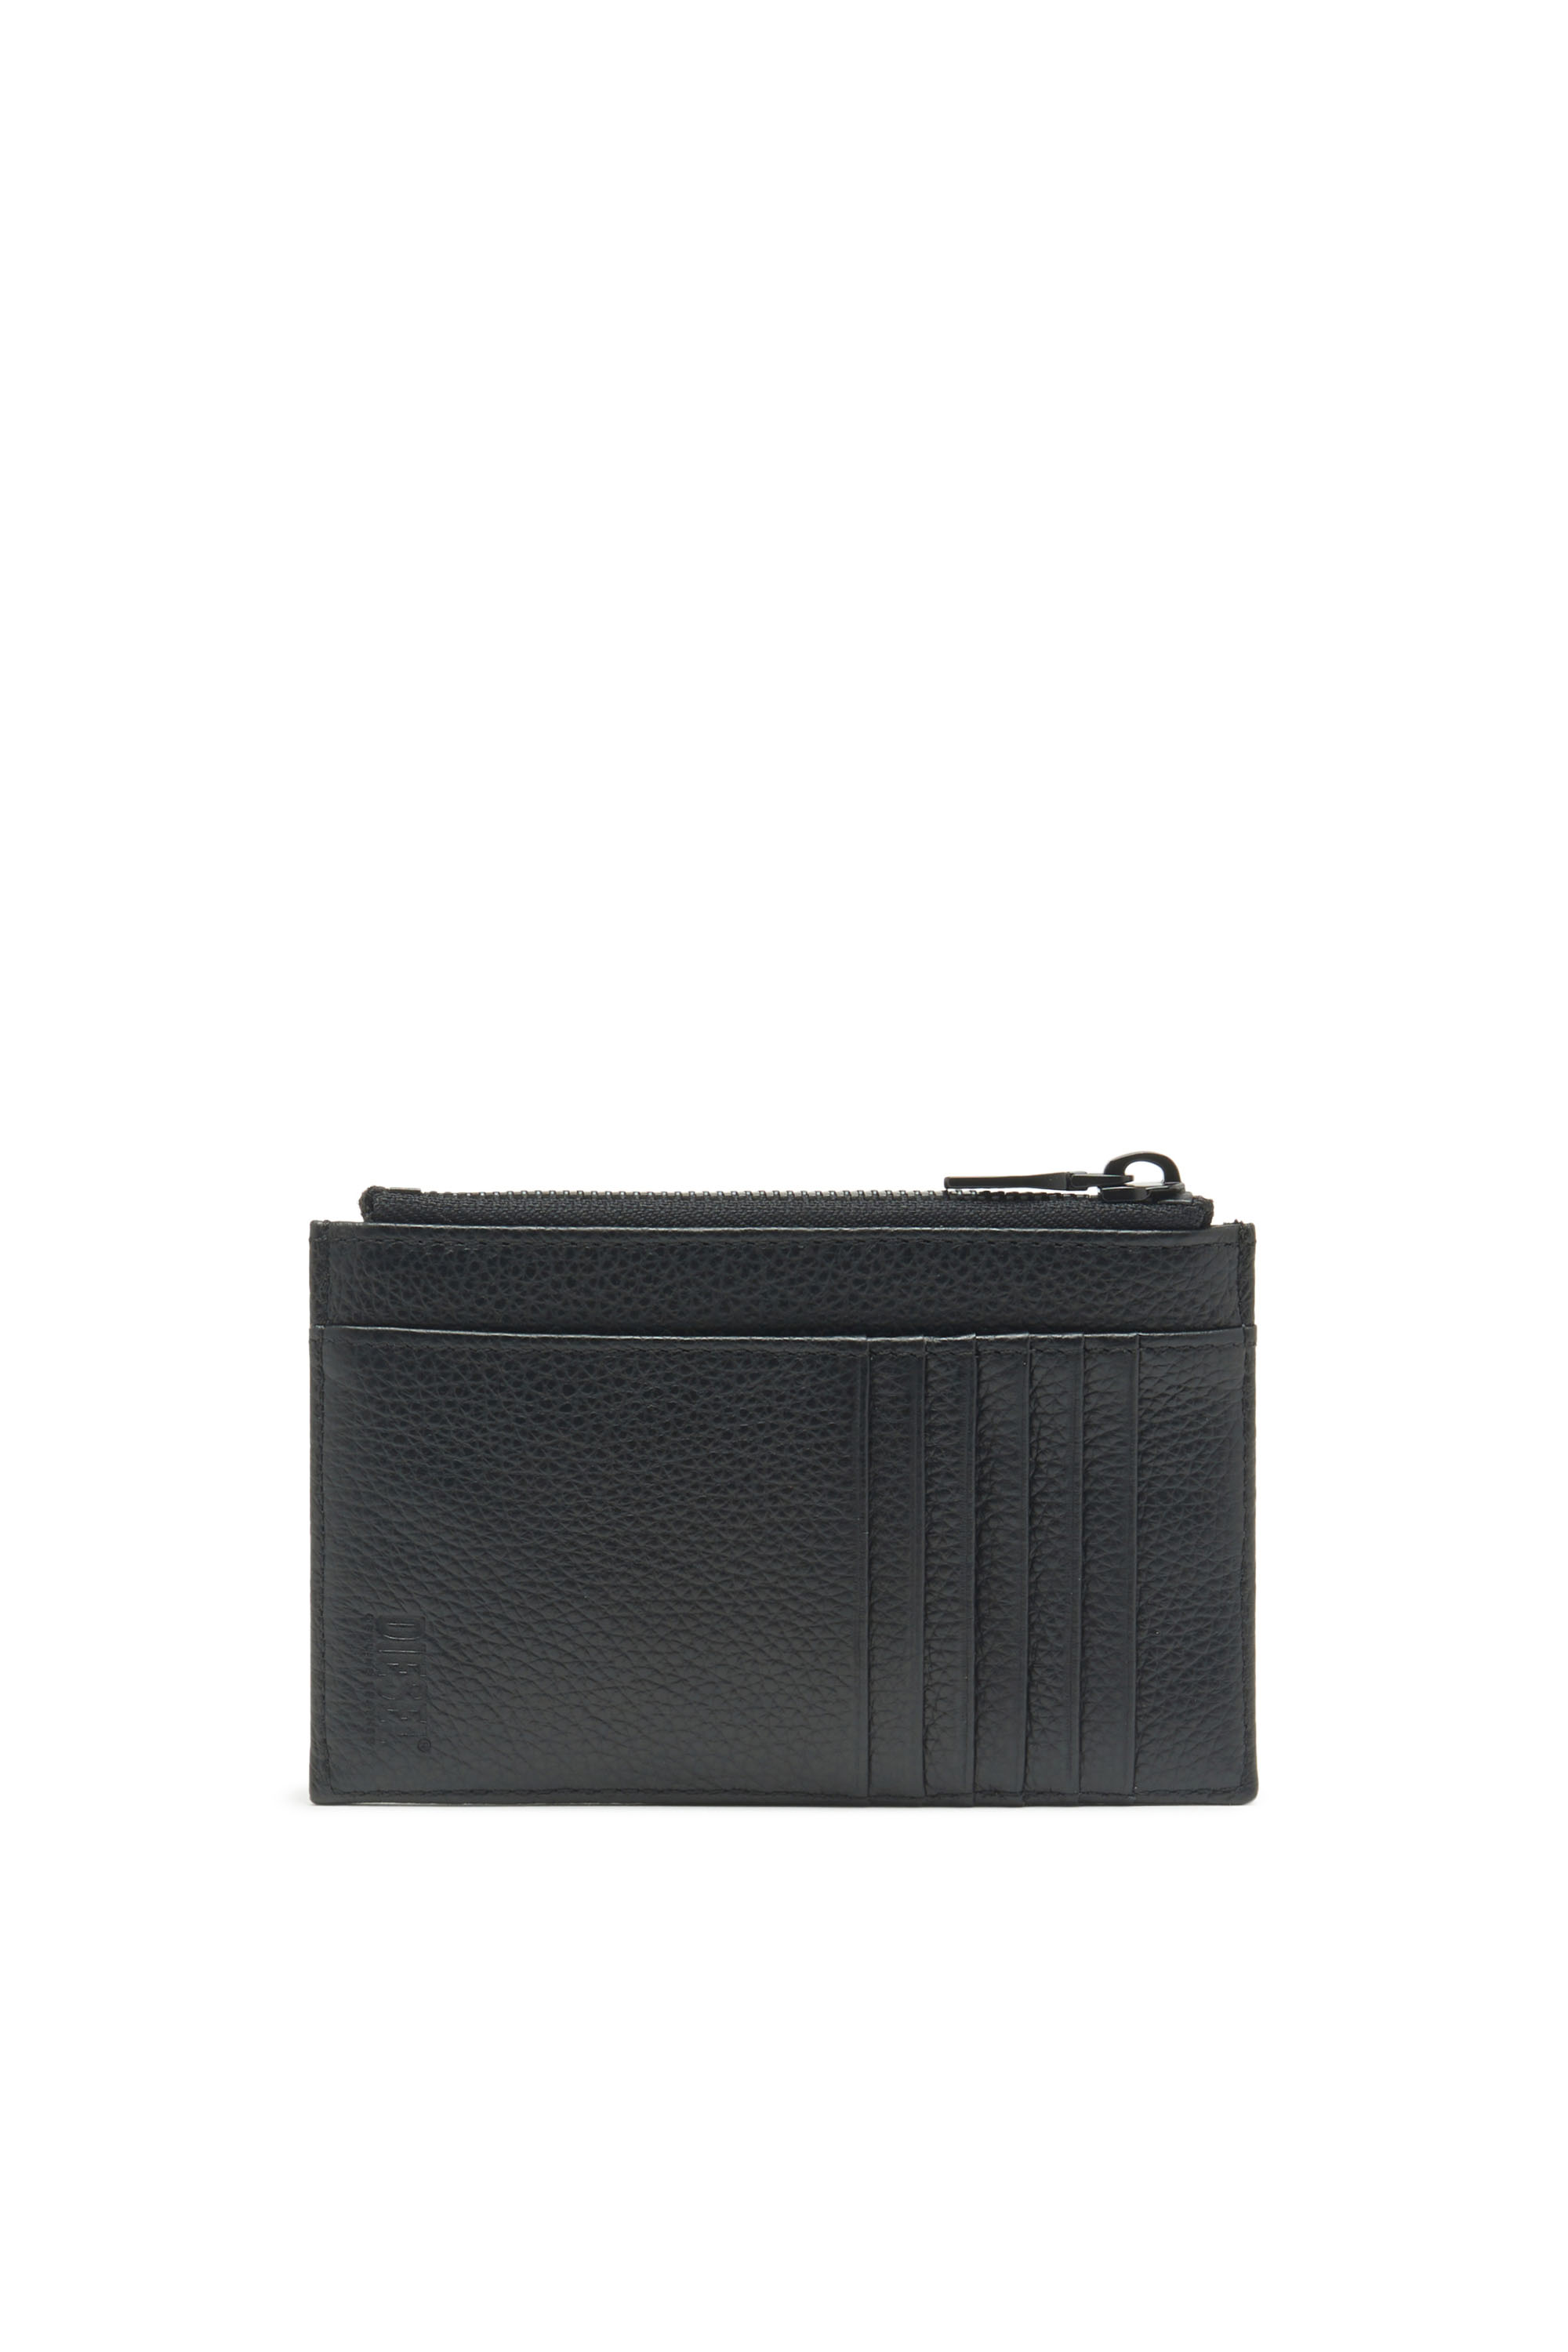 Women's Wallets: Card Cases, Small Wallets, Zip Round